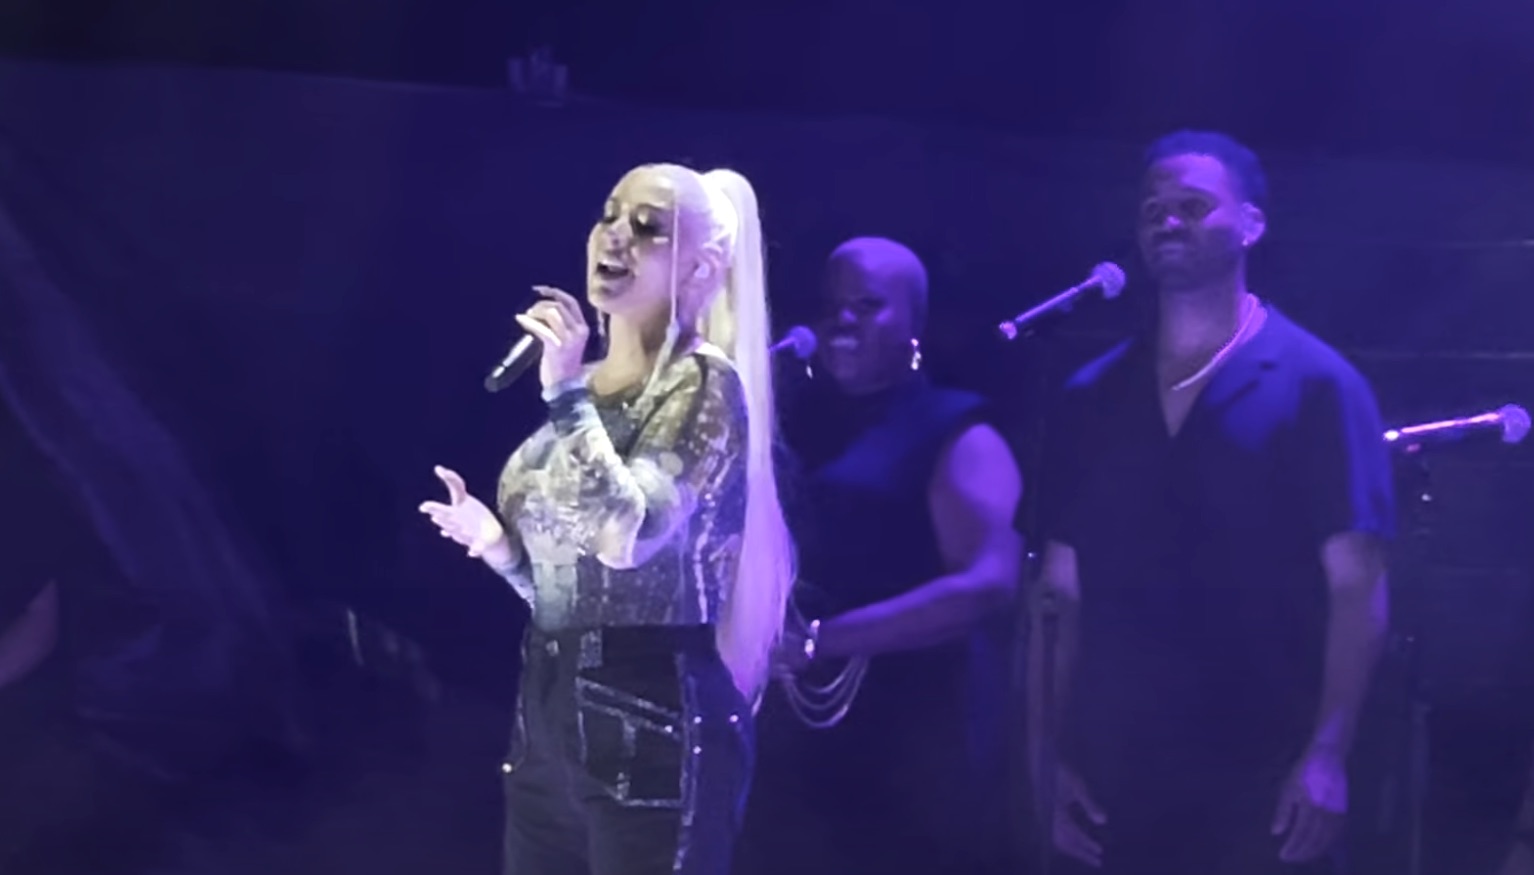 Christina Aguilera Wows With First Performance of ‘Hurt’ in 15 Years